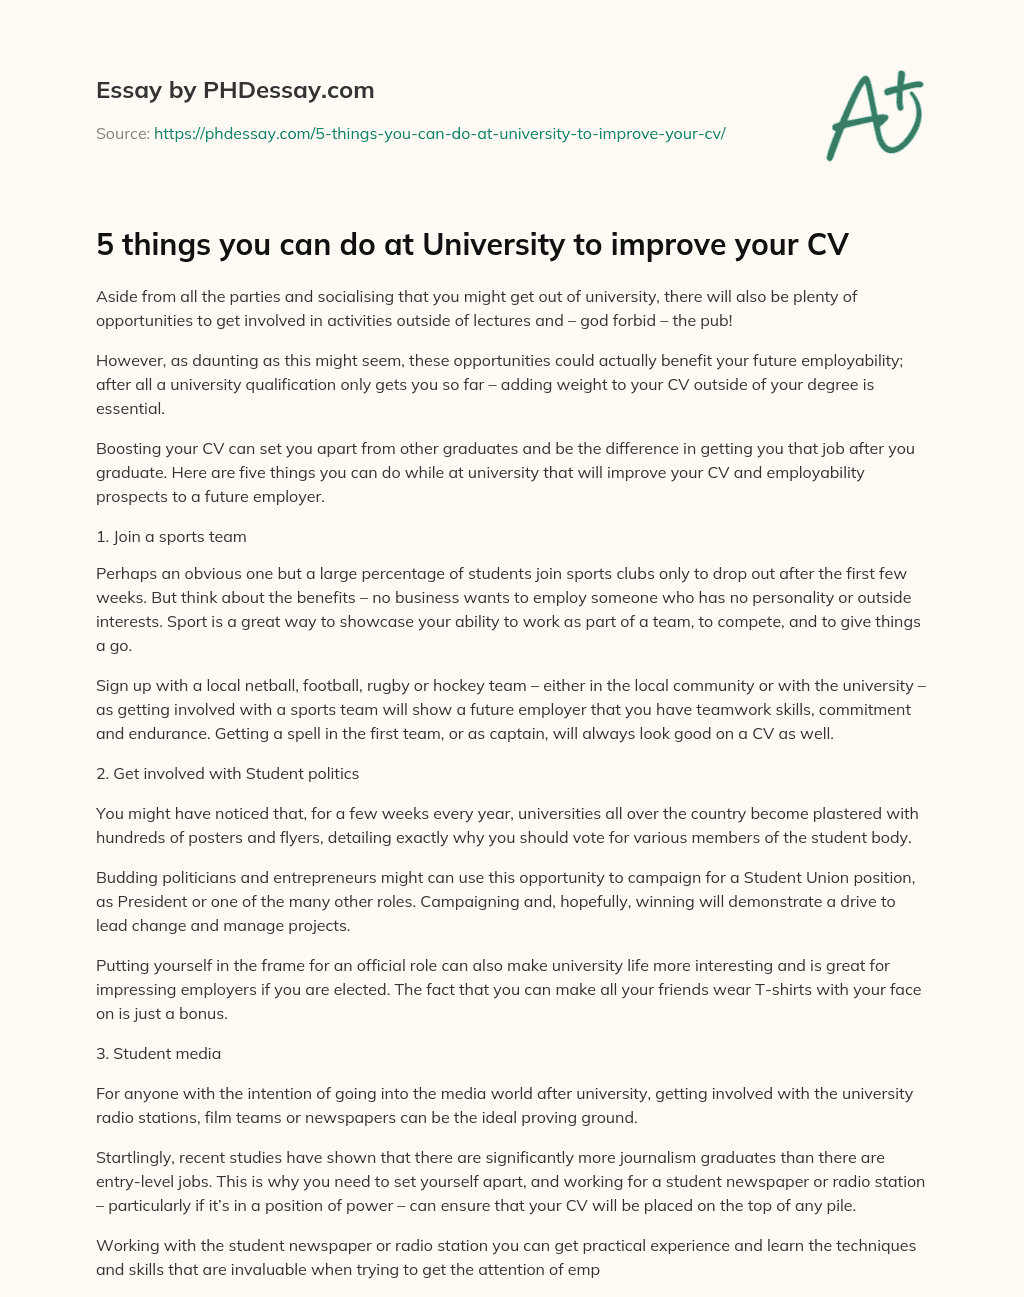 5 things you can do at University to improve your CV essay